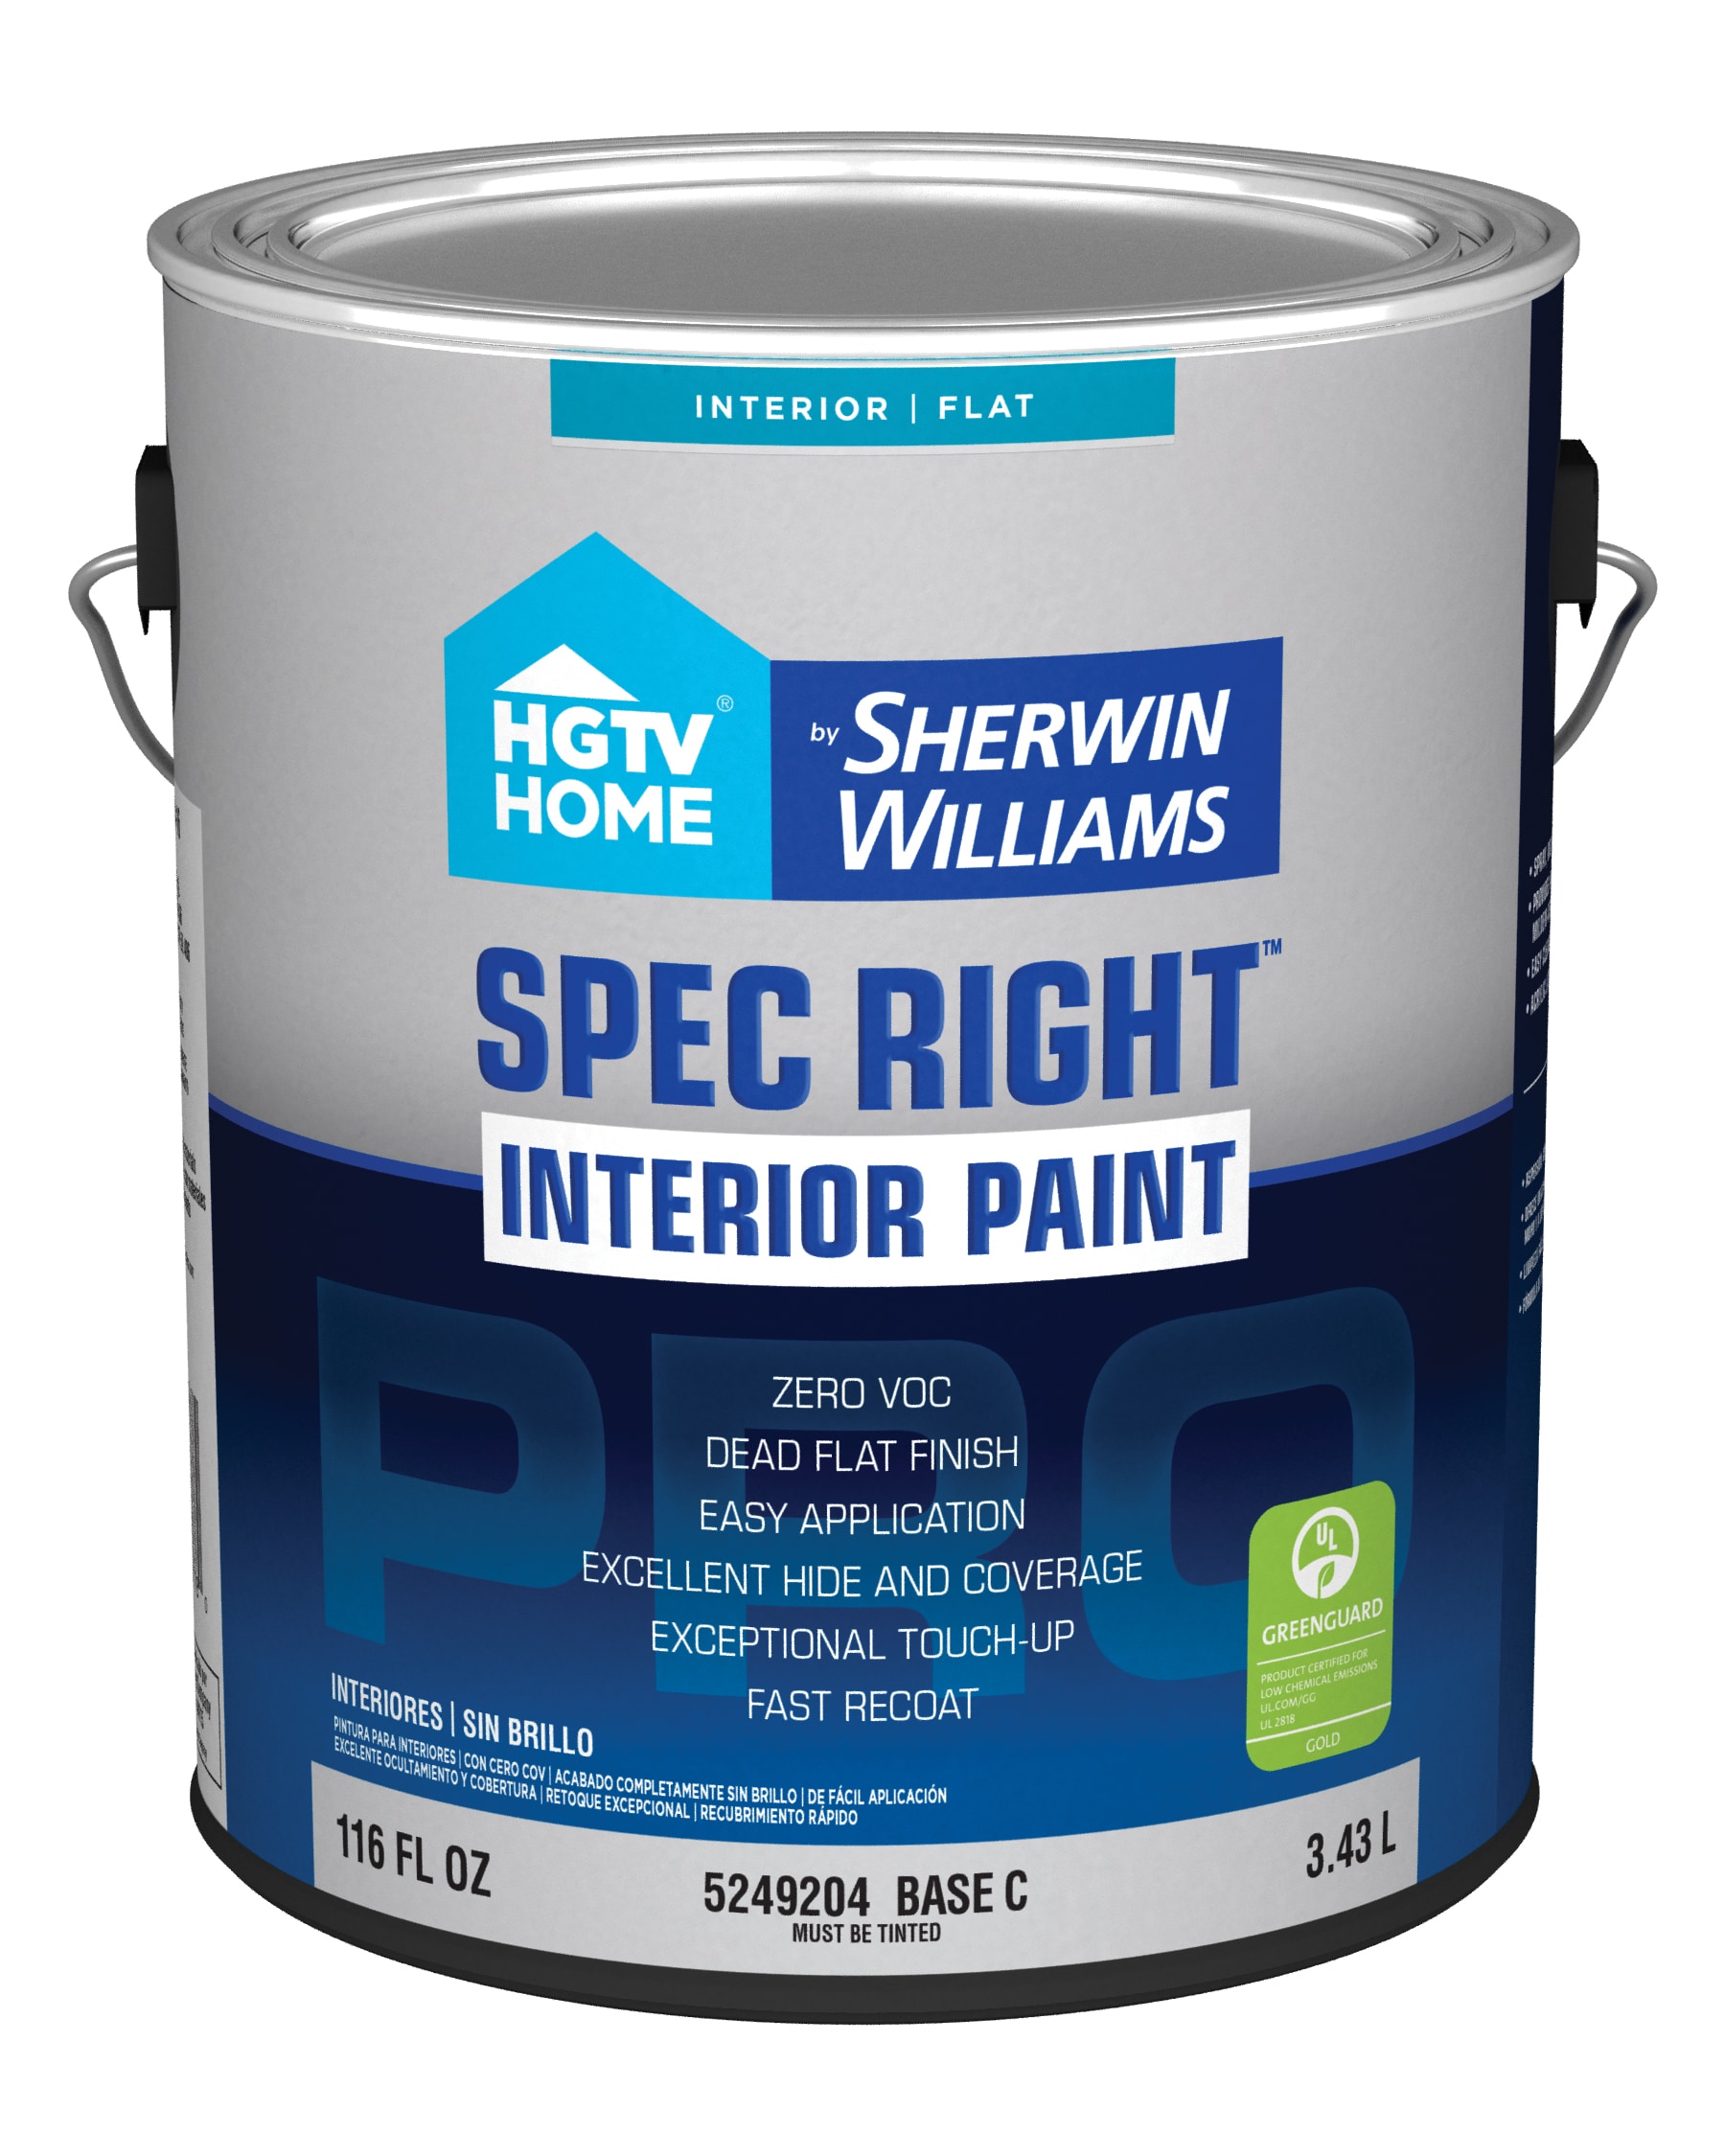 HGTV Home by Sherwin-Williams Ceiling Flat Interior Paint - White - 1 Gal